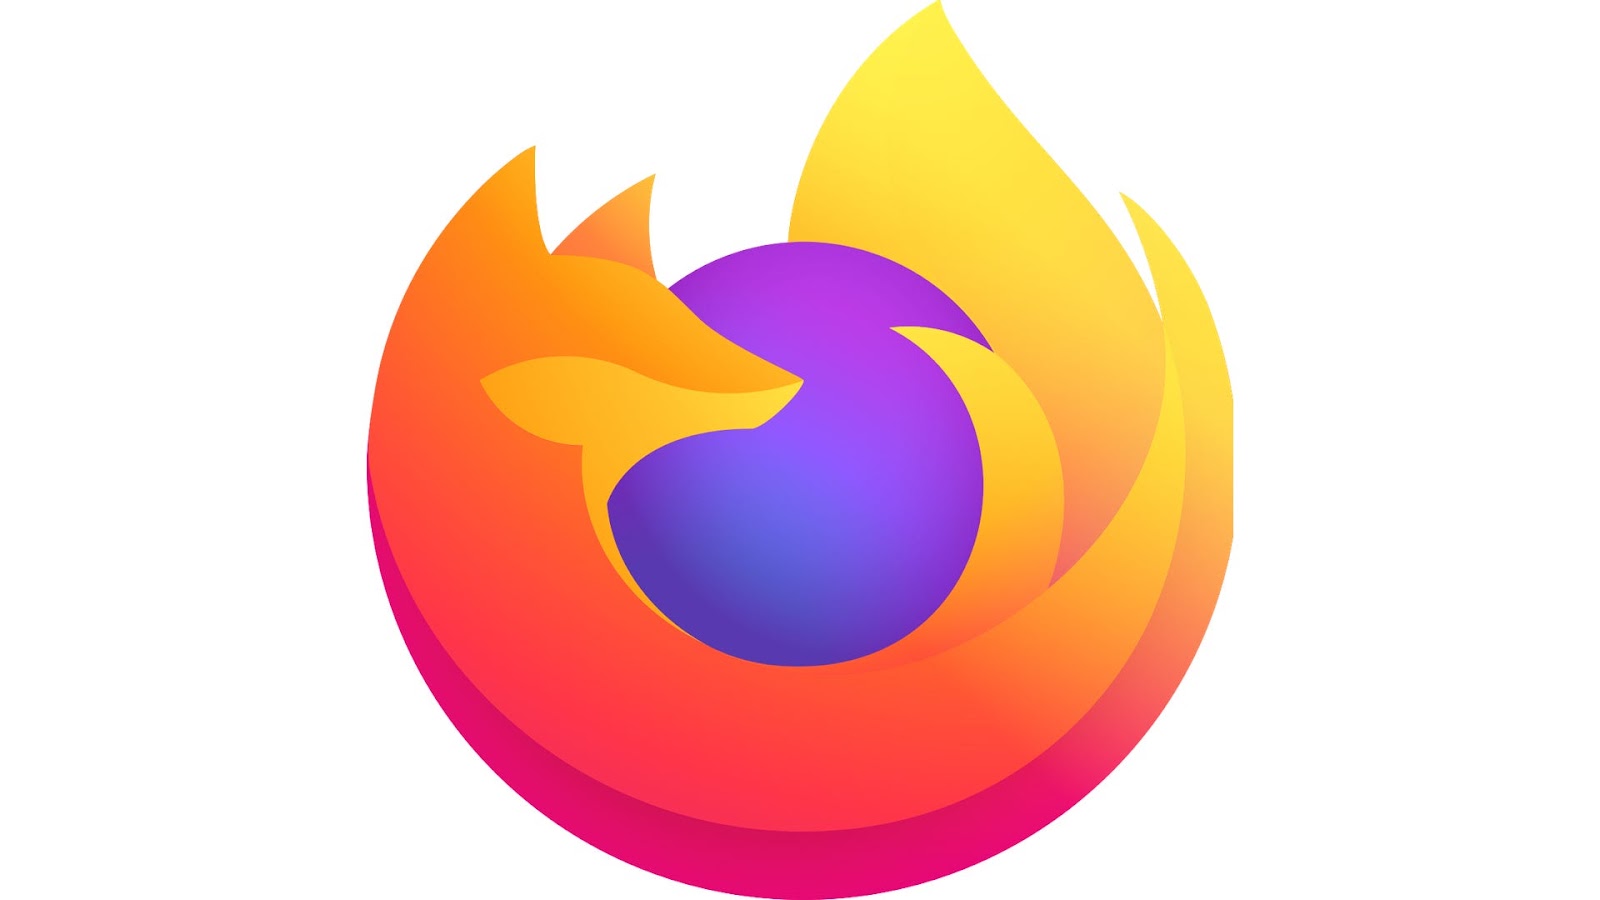 Firefox logo on a white background